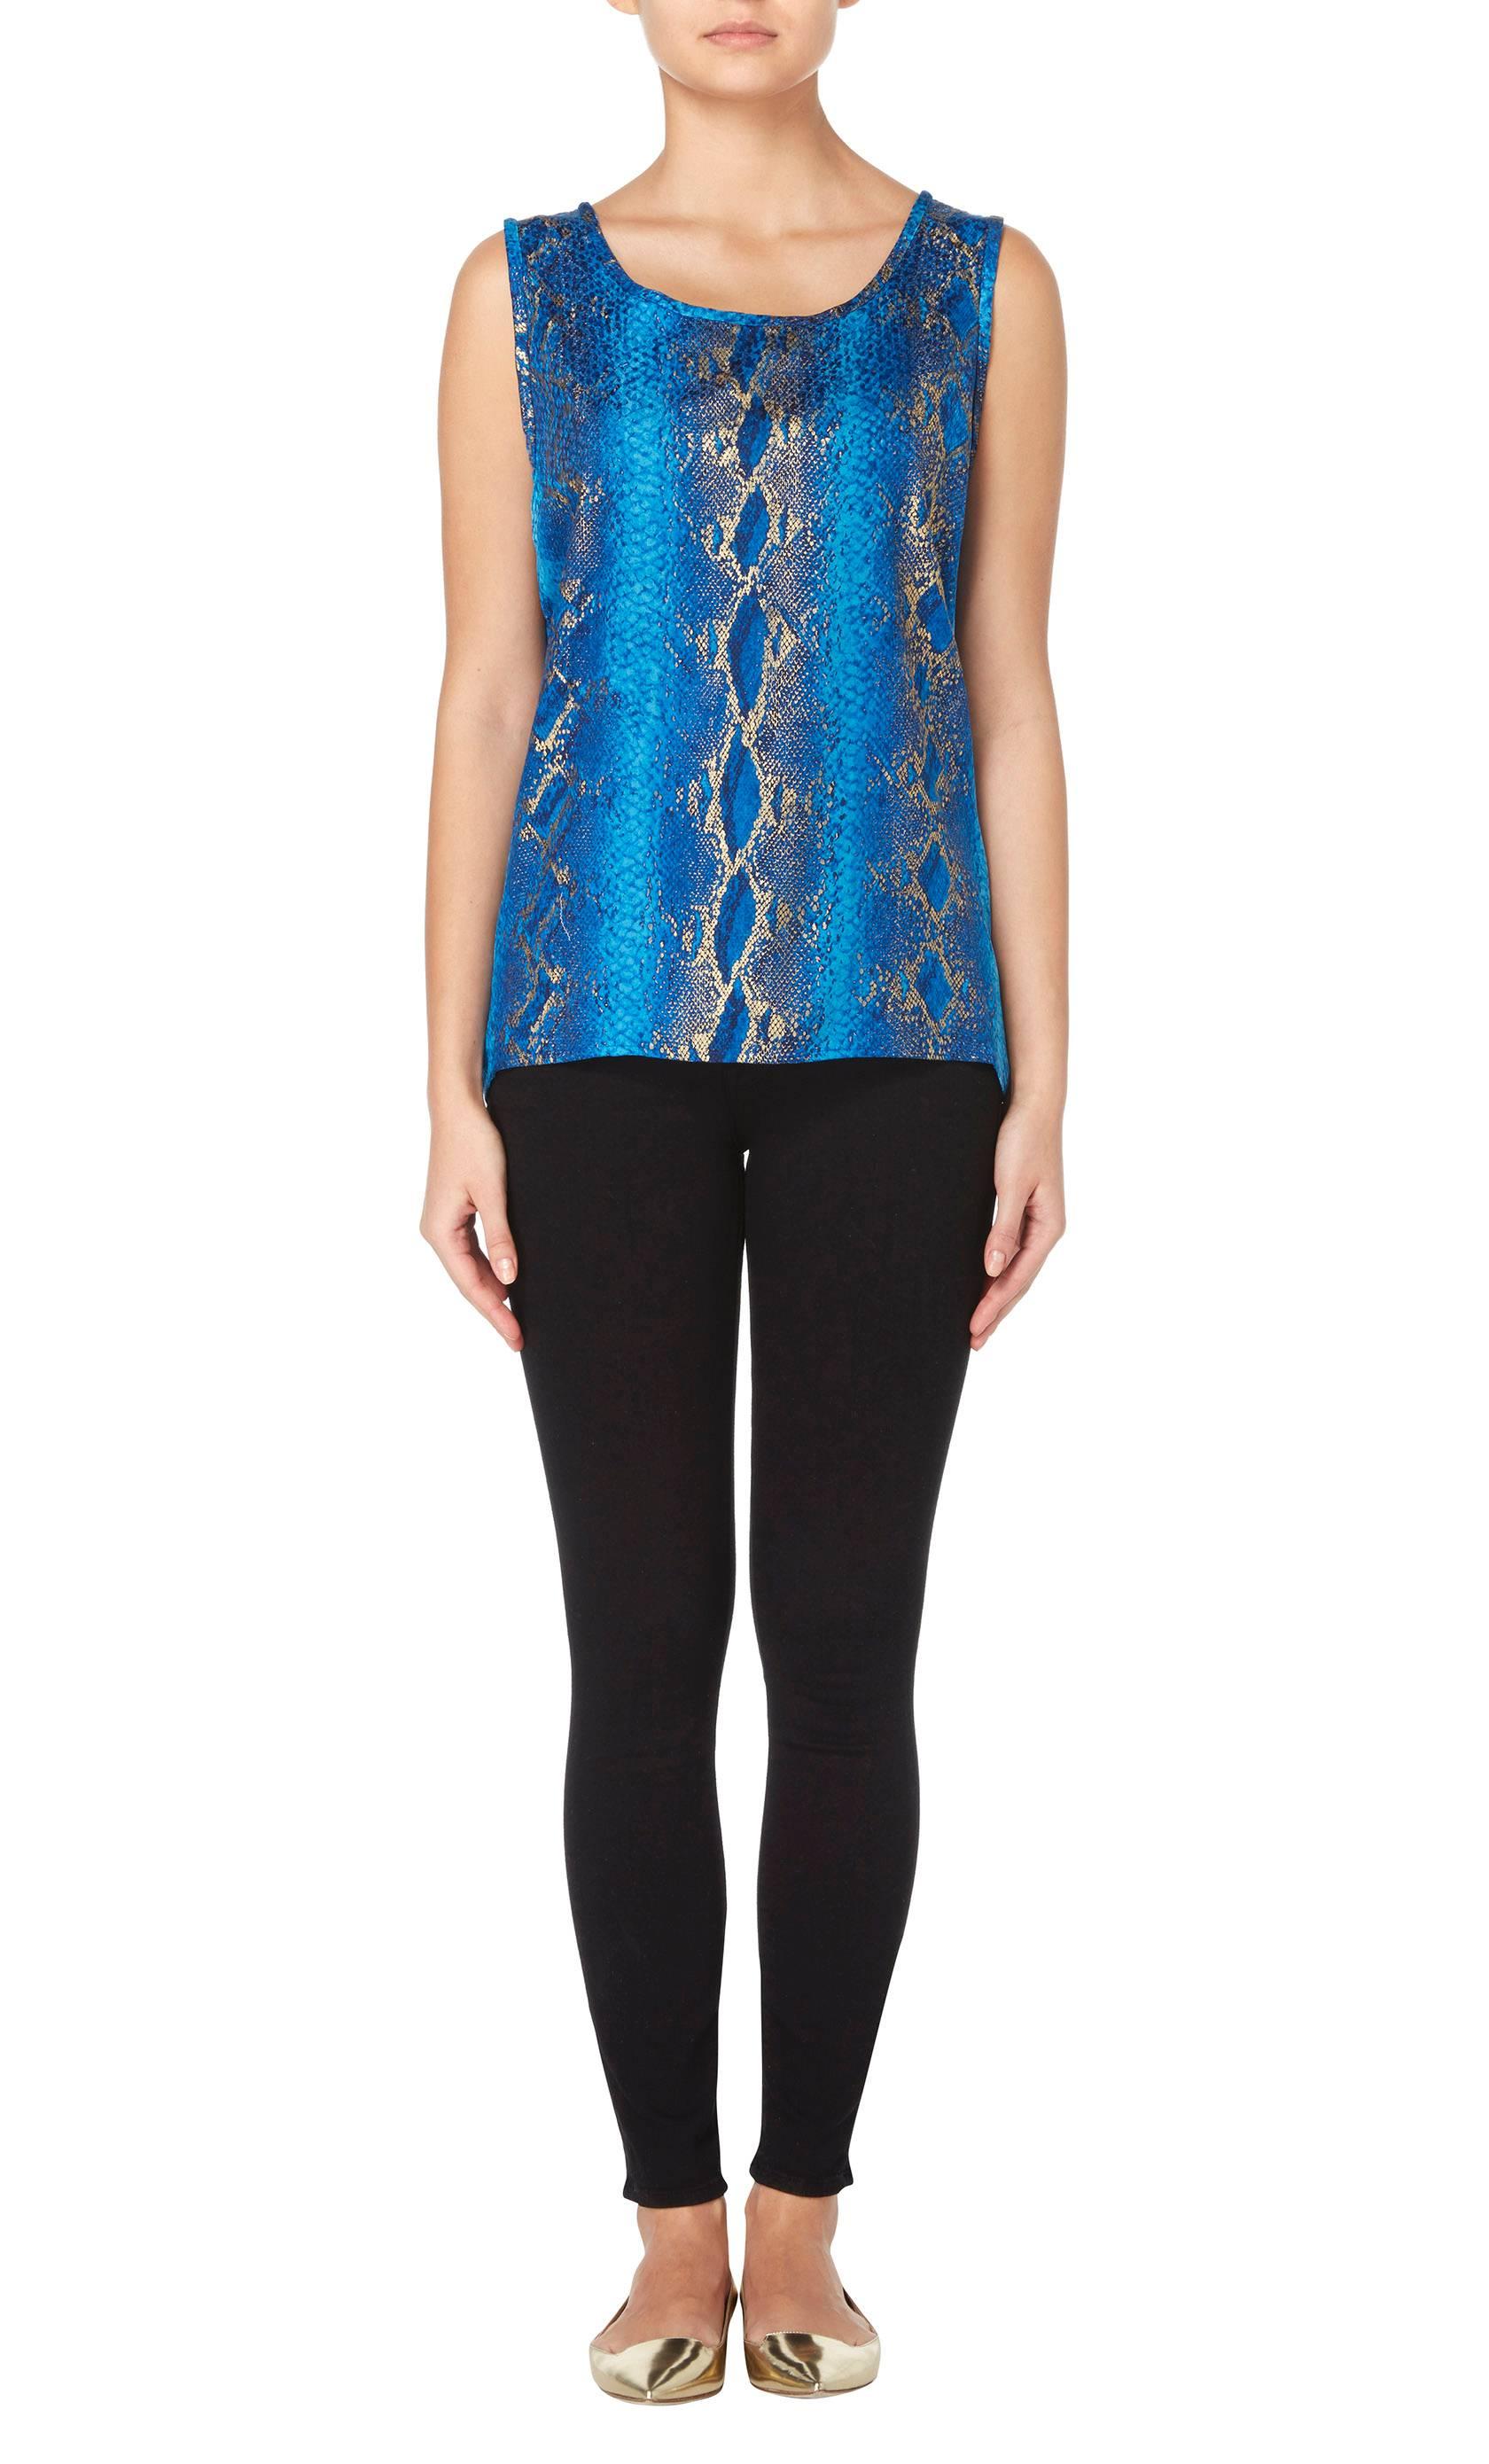 A colourful piece for everyday, this Yves Saint Laurent tank top will look amazing worn under a jacket and teamed with skinny jeans. Constructed in blue snakeskin print silk, the top has metallic gold detailing making it perfect for day or